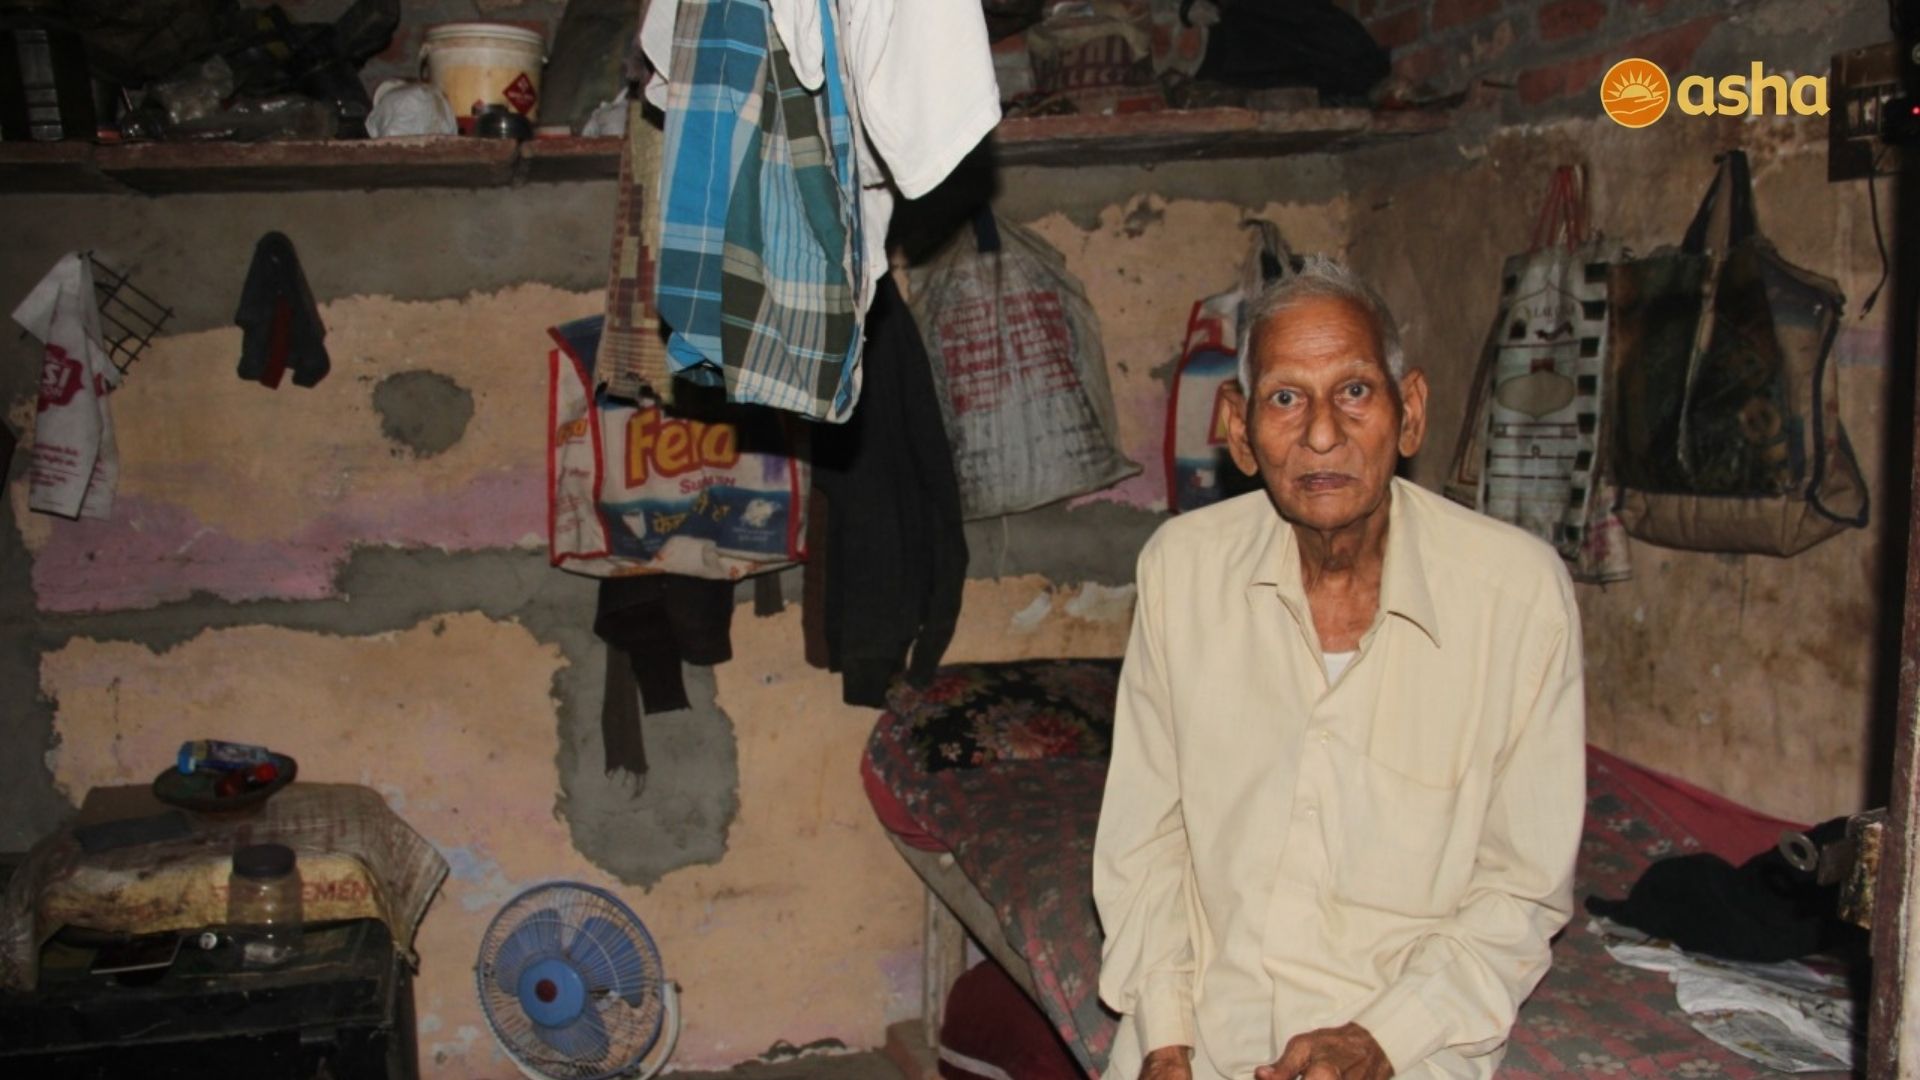 Elderly man living alone in the slums cared for by Asha